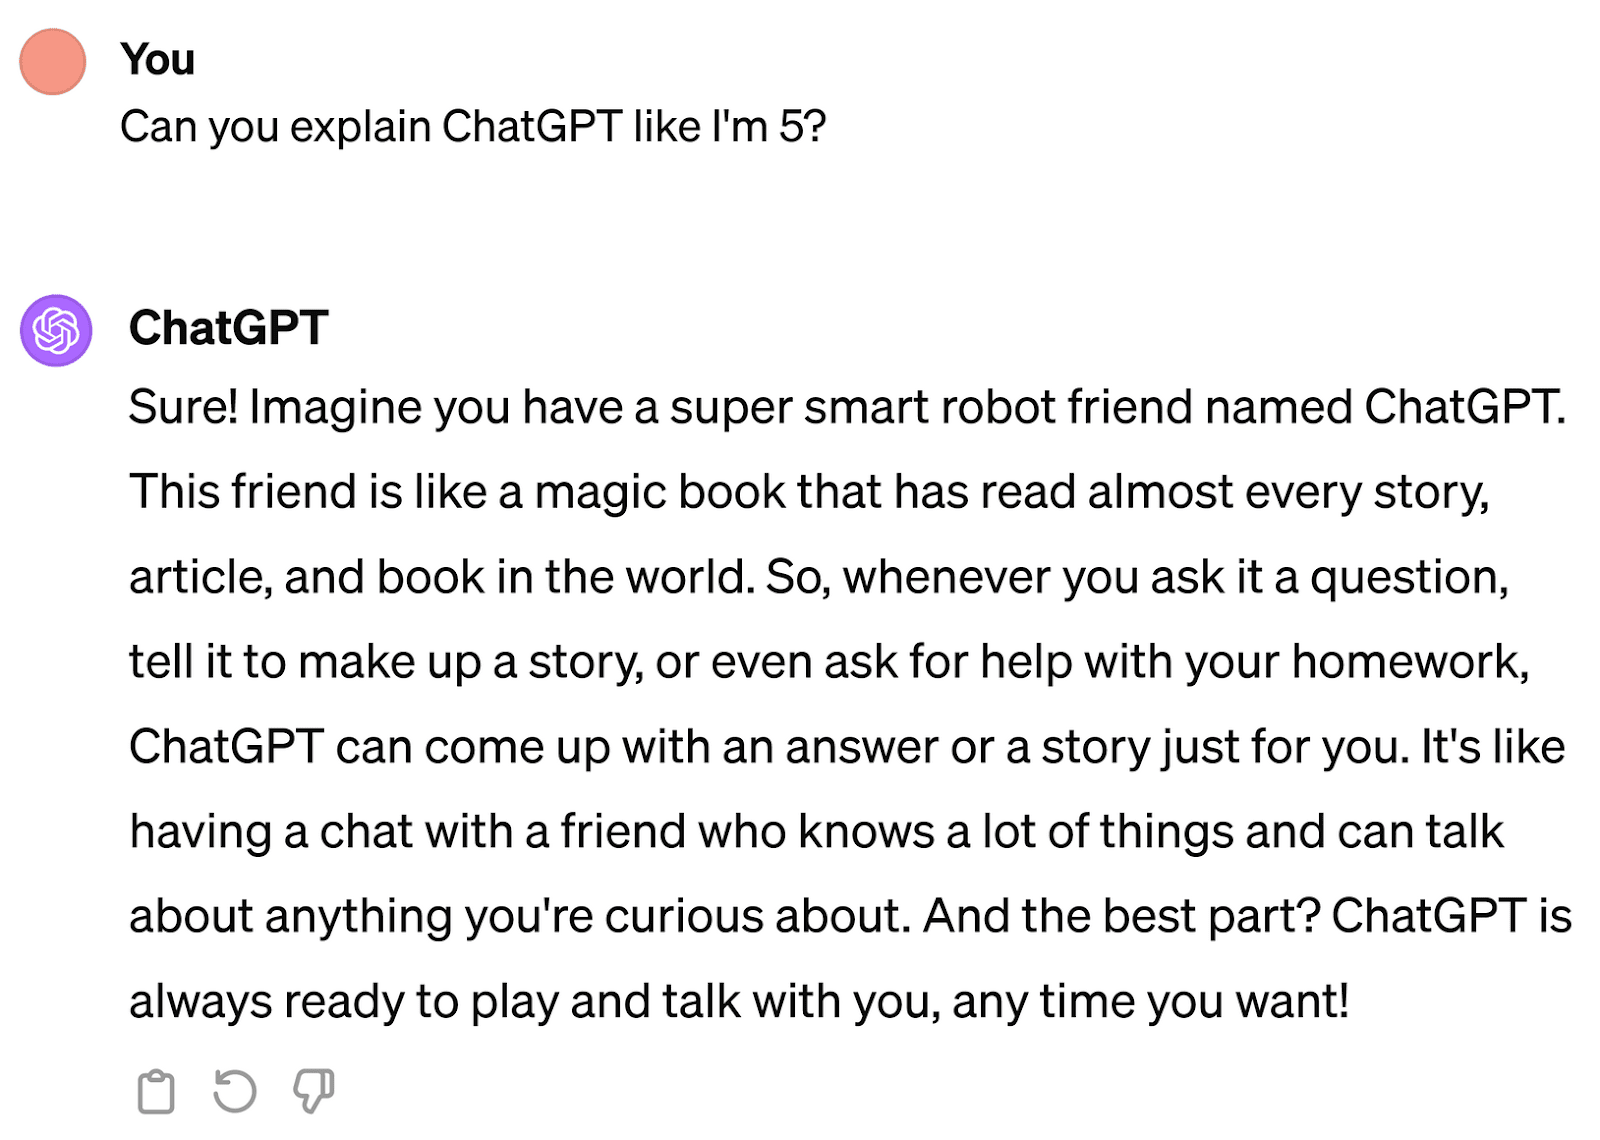 ChatGPT's response to "Can you explain ChatGPT like I'm 5?" query